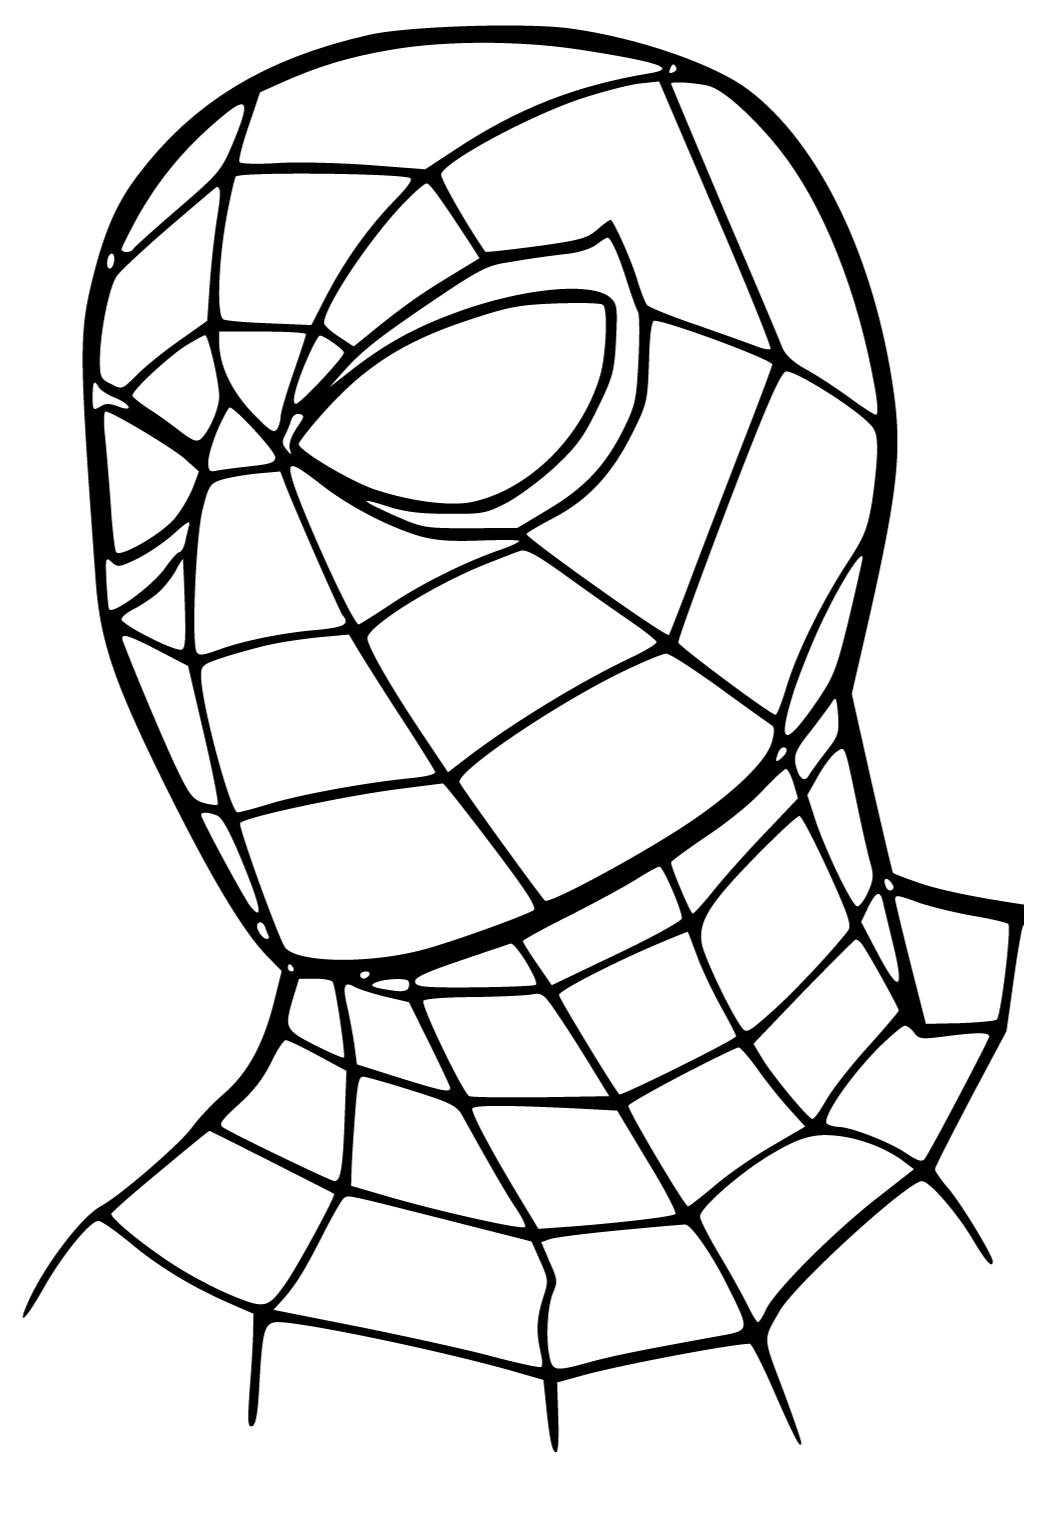 Free printable spiderman head coloring page for adults and kids